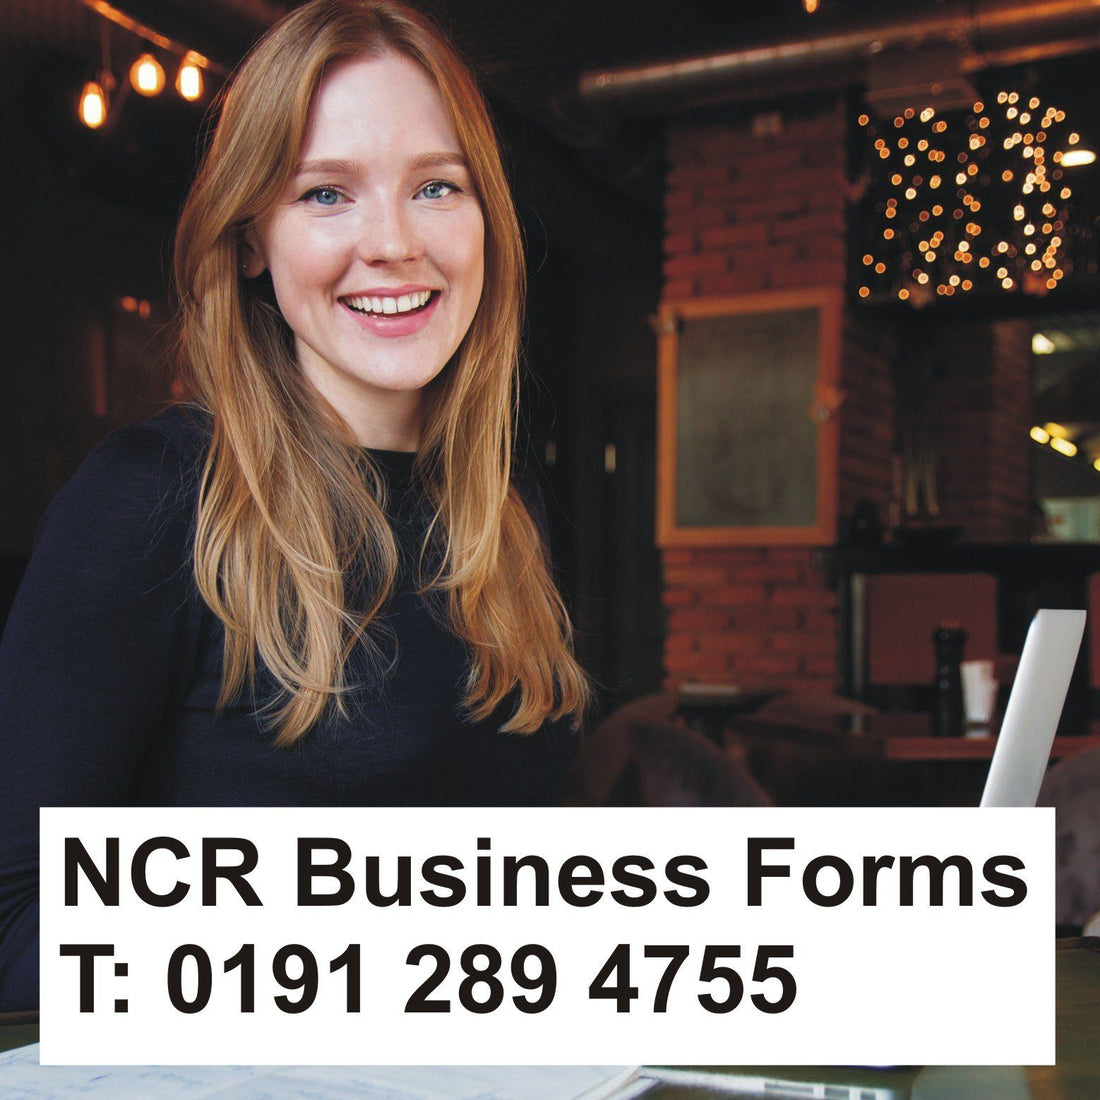 Do you need to order NCR Business Forms?